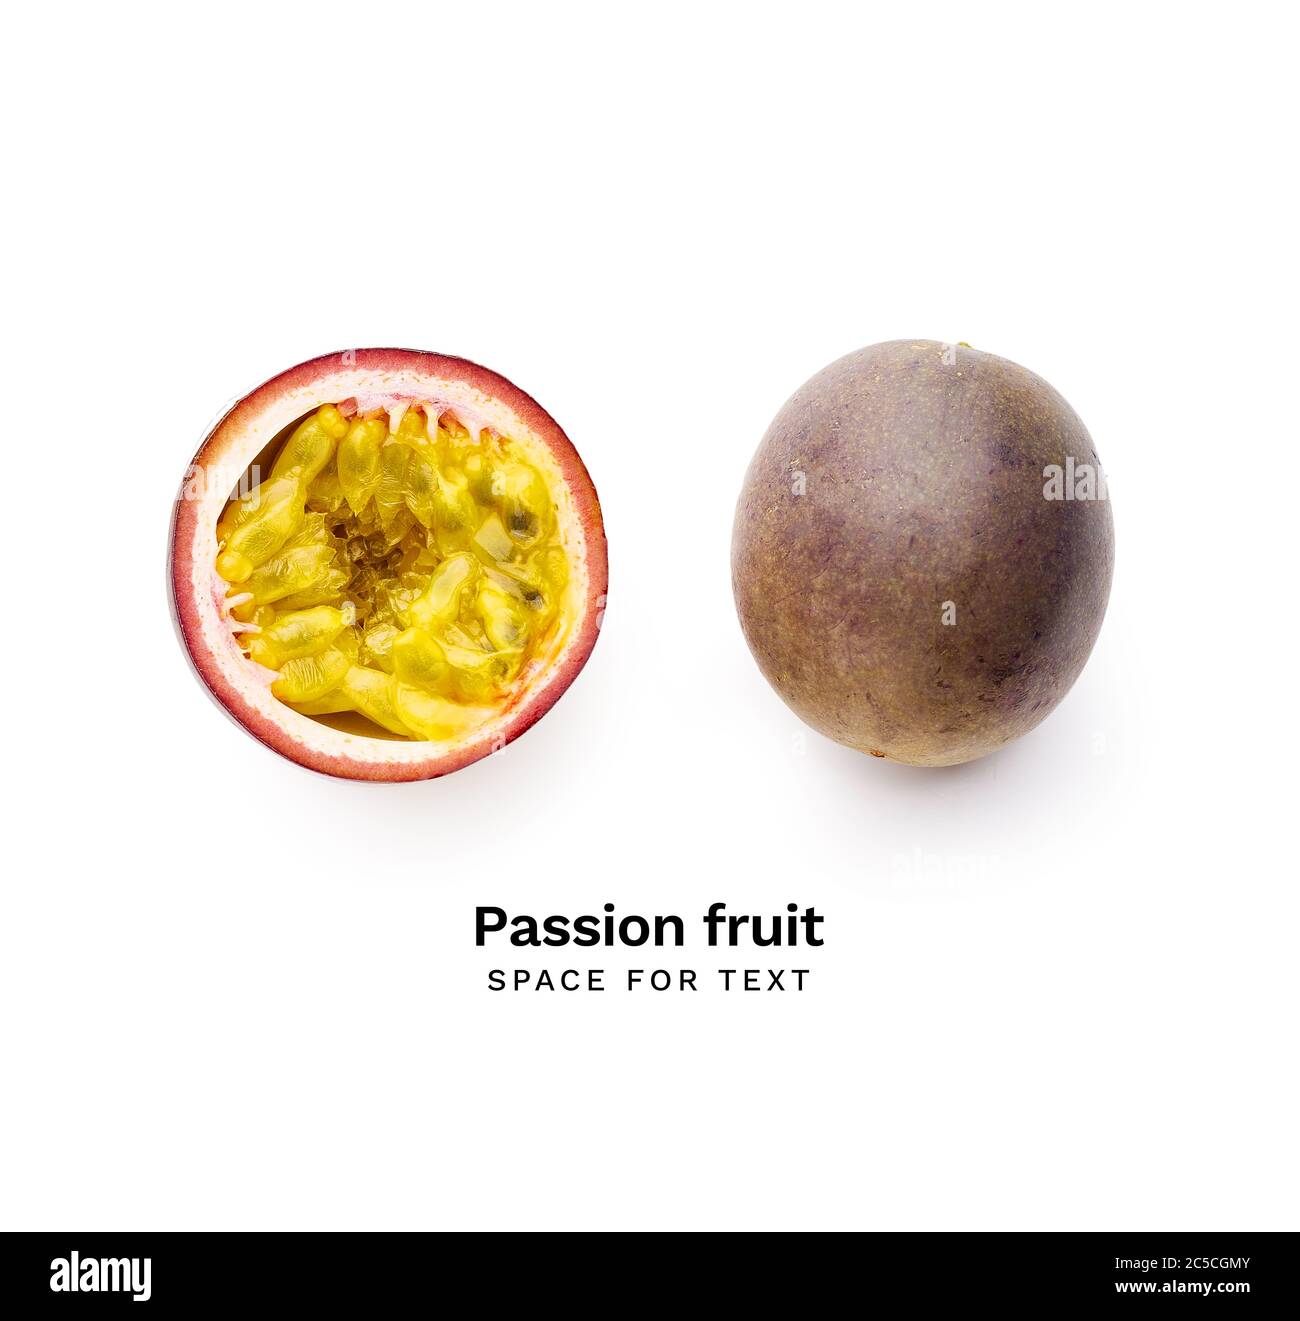 Whole and sliced passion fruit or maracuya isolated on white background. Top view layout with copy space Stock Photo